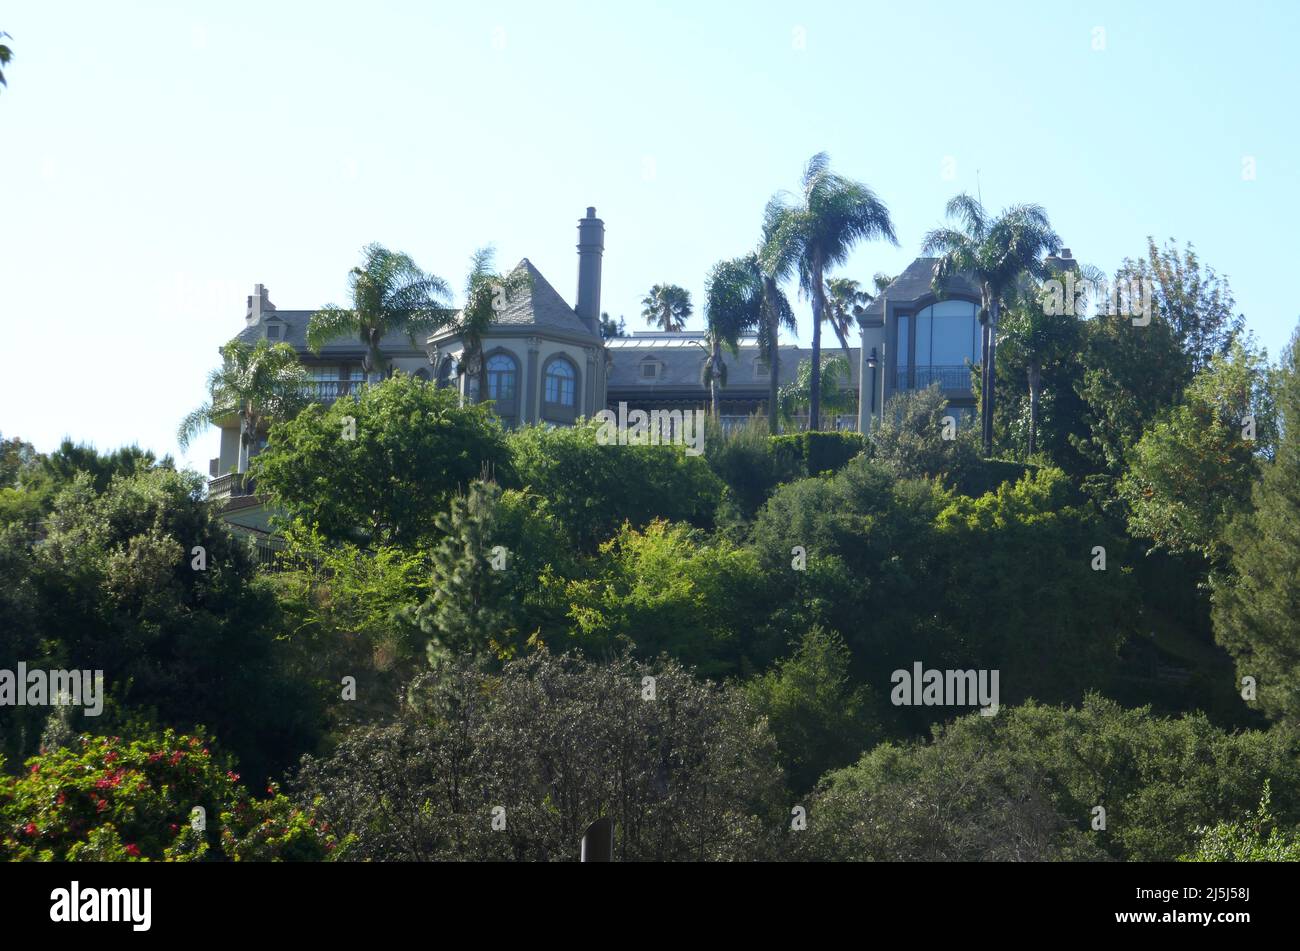 Beverly Hills, California, USA 15th April 2022 Producer Aaron Spelling's Former home The Manor, $165 Million house at 594 S. Mapleton Drive on April 15, 2022 in Beverly Hills, California, USA. Its the Largest House in Los Angeles County with 123 Rooms, 27 bathrooms, 14 Bedrooms, Screening Room, Bowling Alley, Gym, tennis court, pool. Constructed in 1988 for Aaron Spelling then owned by Brtish Heiress Petra Ecclestone, daughter of Formula One Racing Magnate Bernie Ecclestone. Photo by Barry King/Alamy Stock Photo Stock Photo